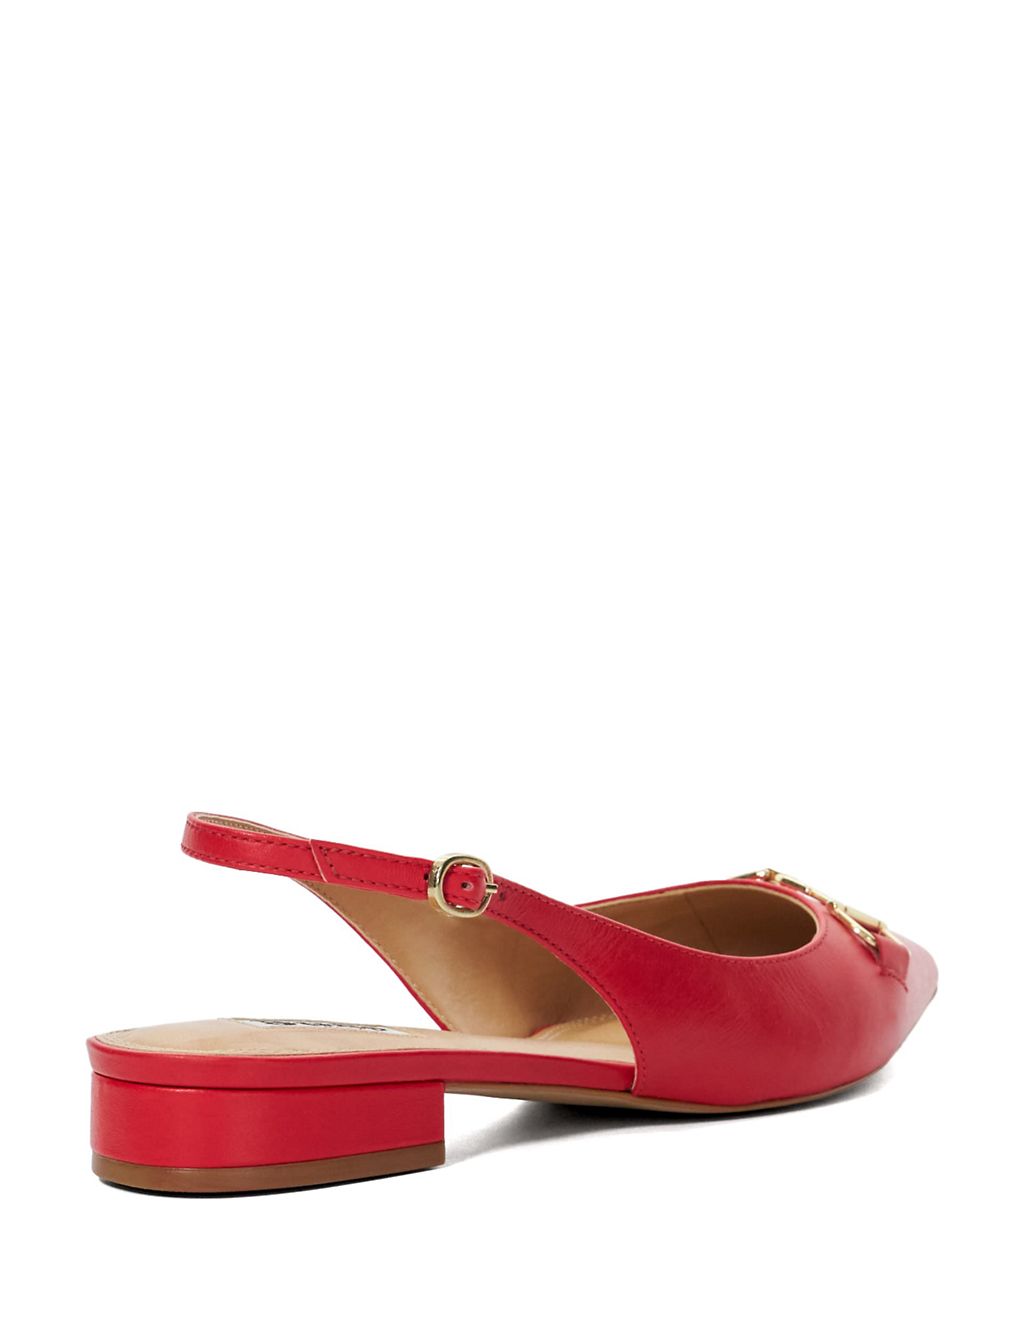 Leather Buckle Flat Pointed Ballet Pumps 2 of 5